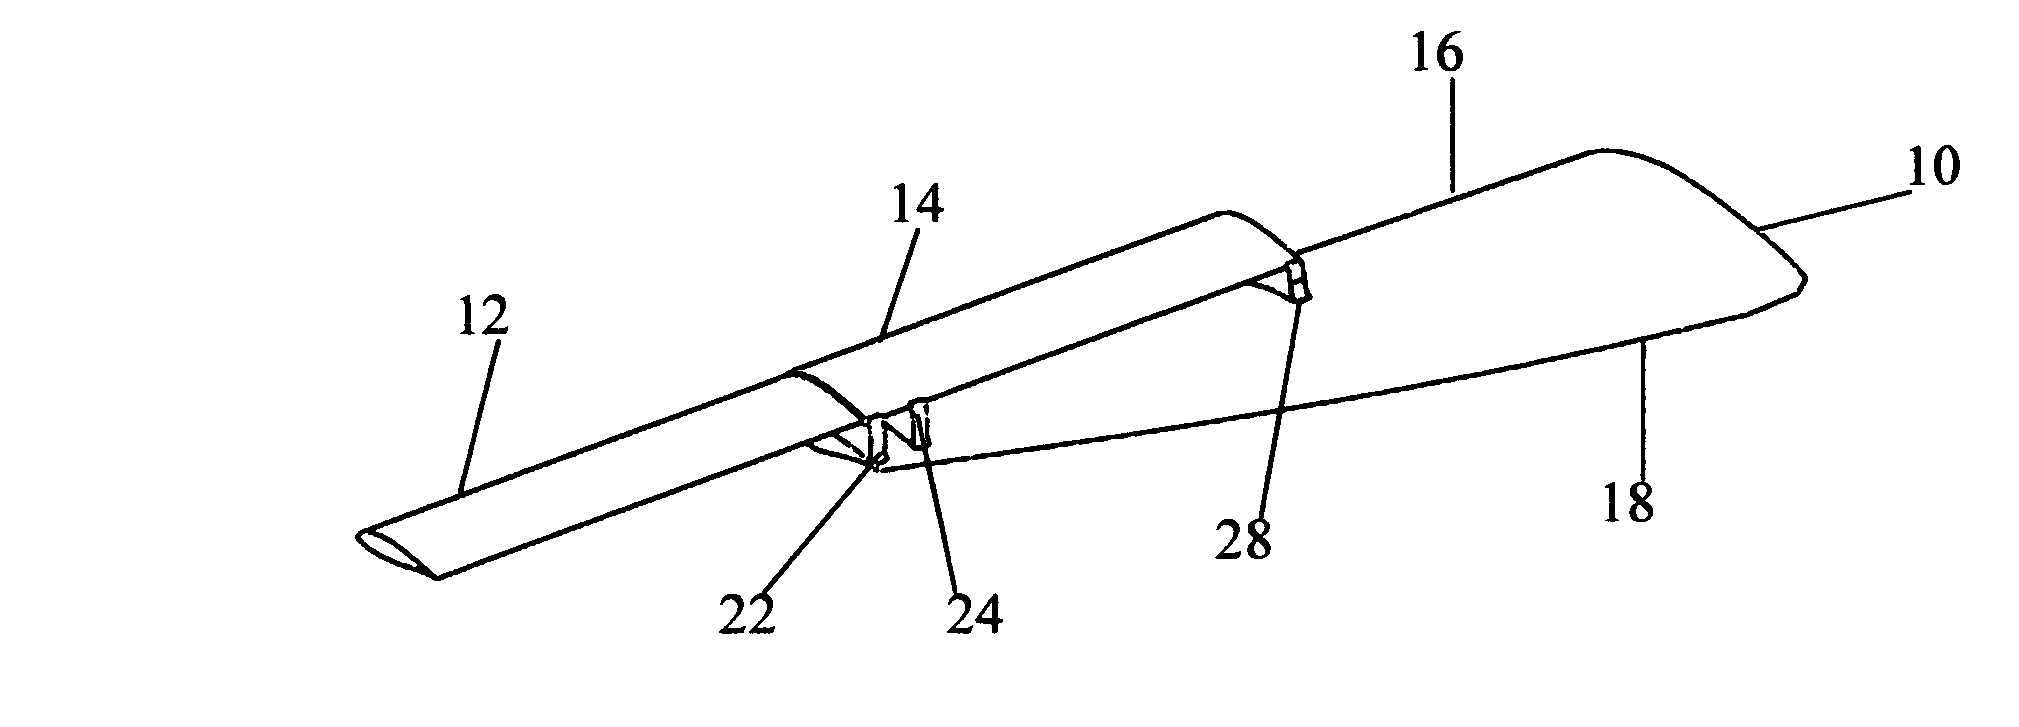 Extendable rotor blades for power generating wind and ocean current turbines within a module mounted atop a main blade